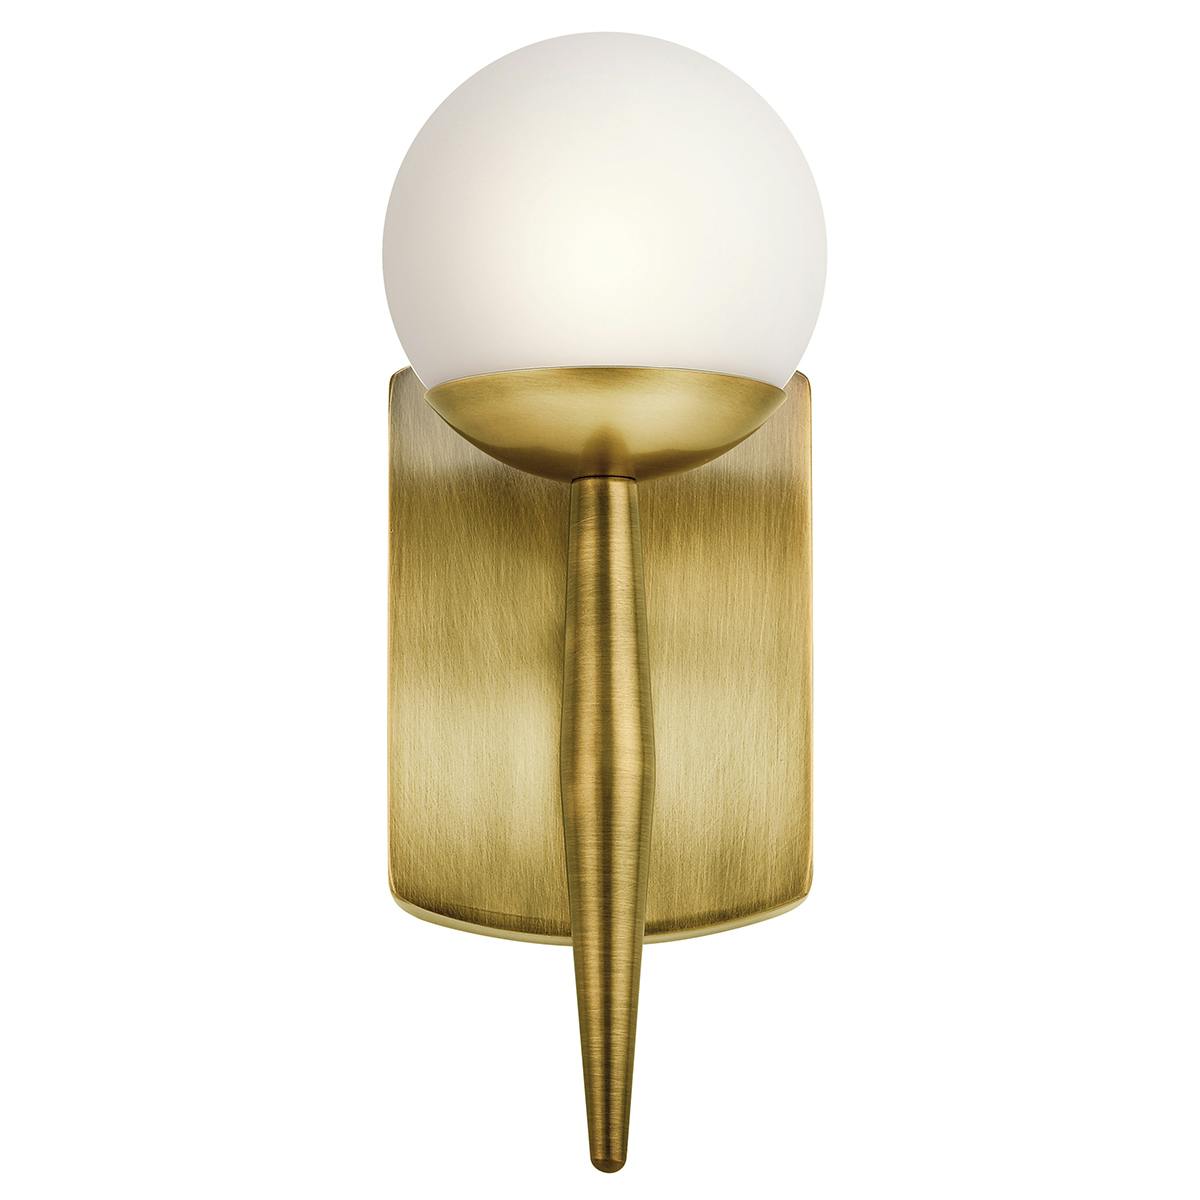 Front view of the Jasper 11.5" 1 Light Halogen Sconce Brass on a white background